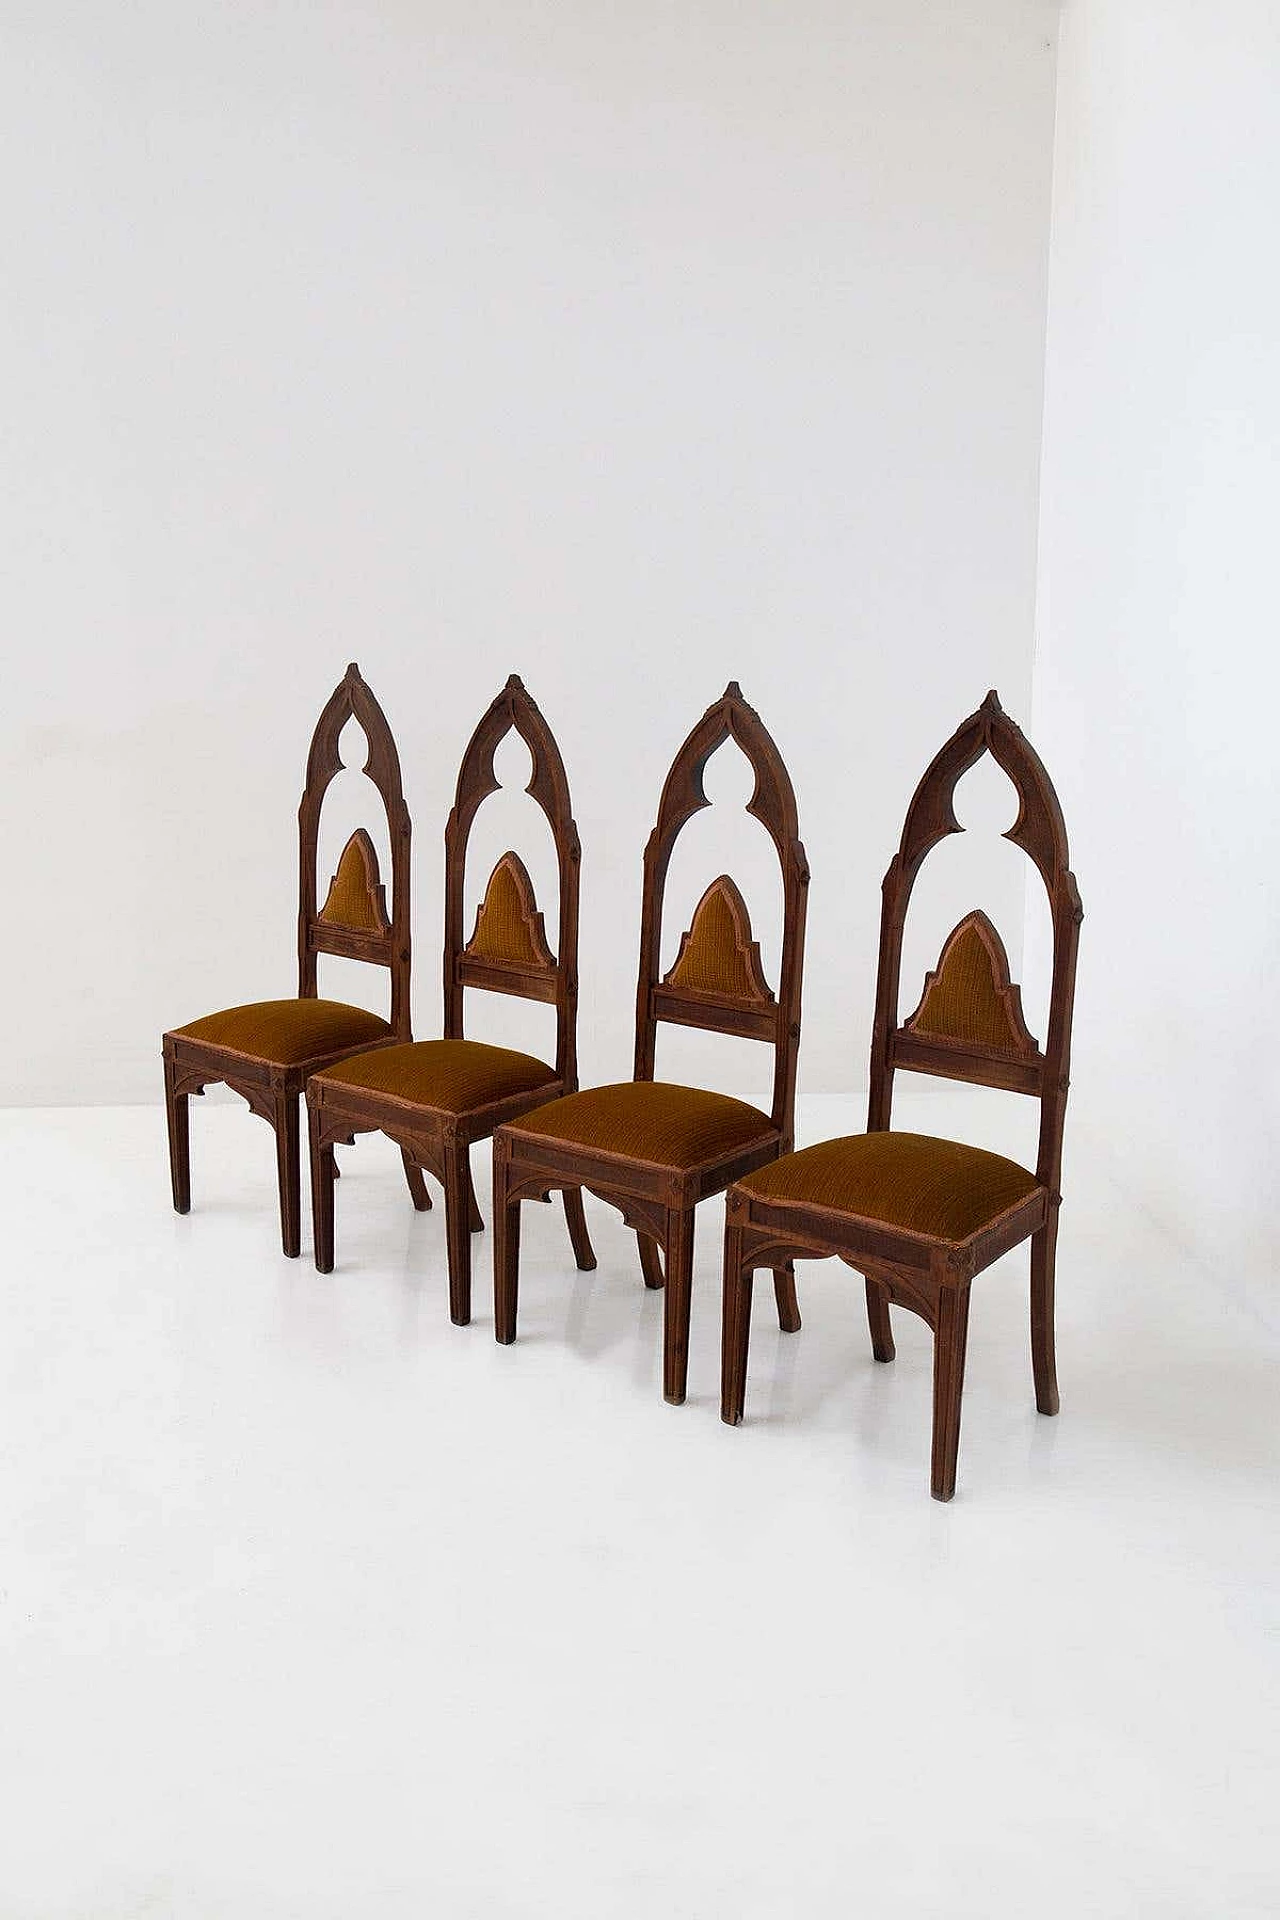 4 Venetian Gothic-style chairs in wood and orange ribbed fabric, 1920s 1